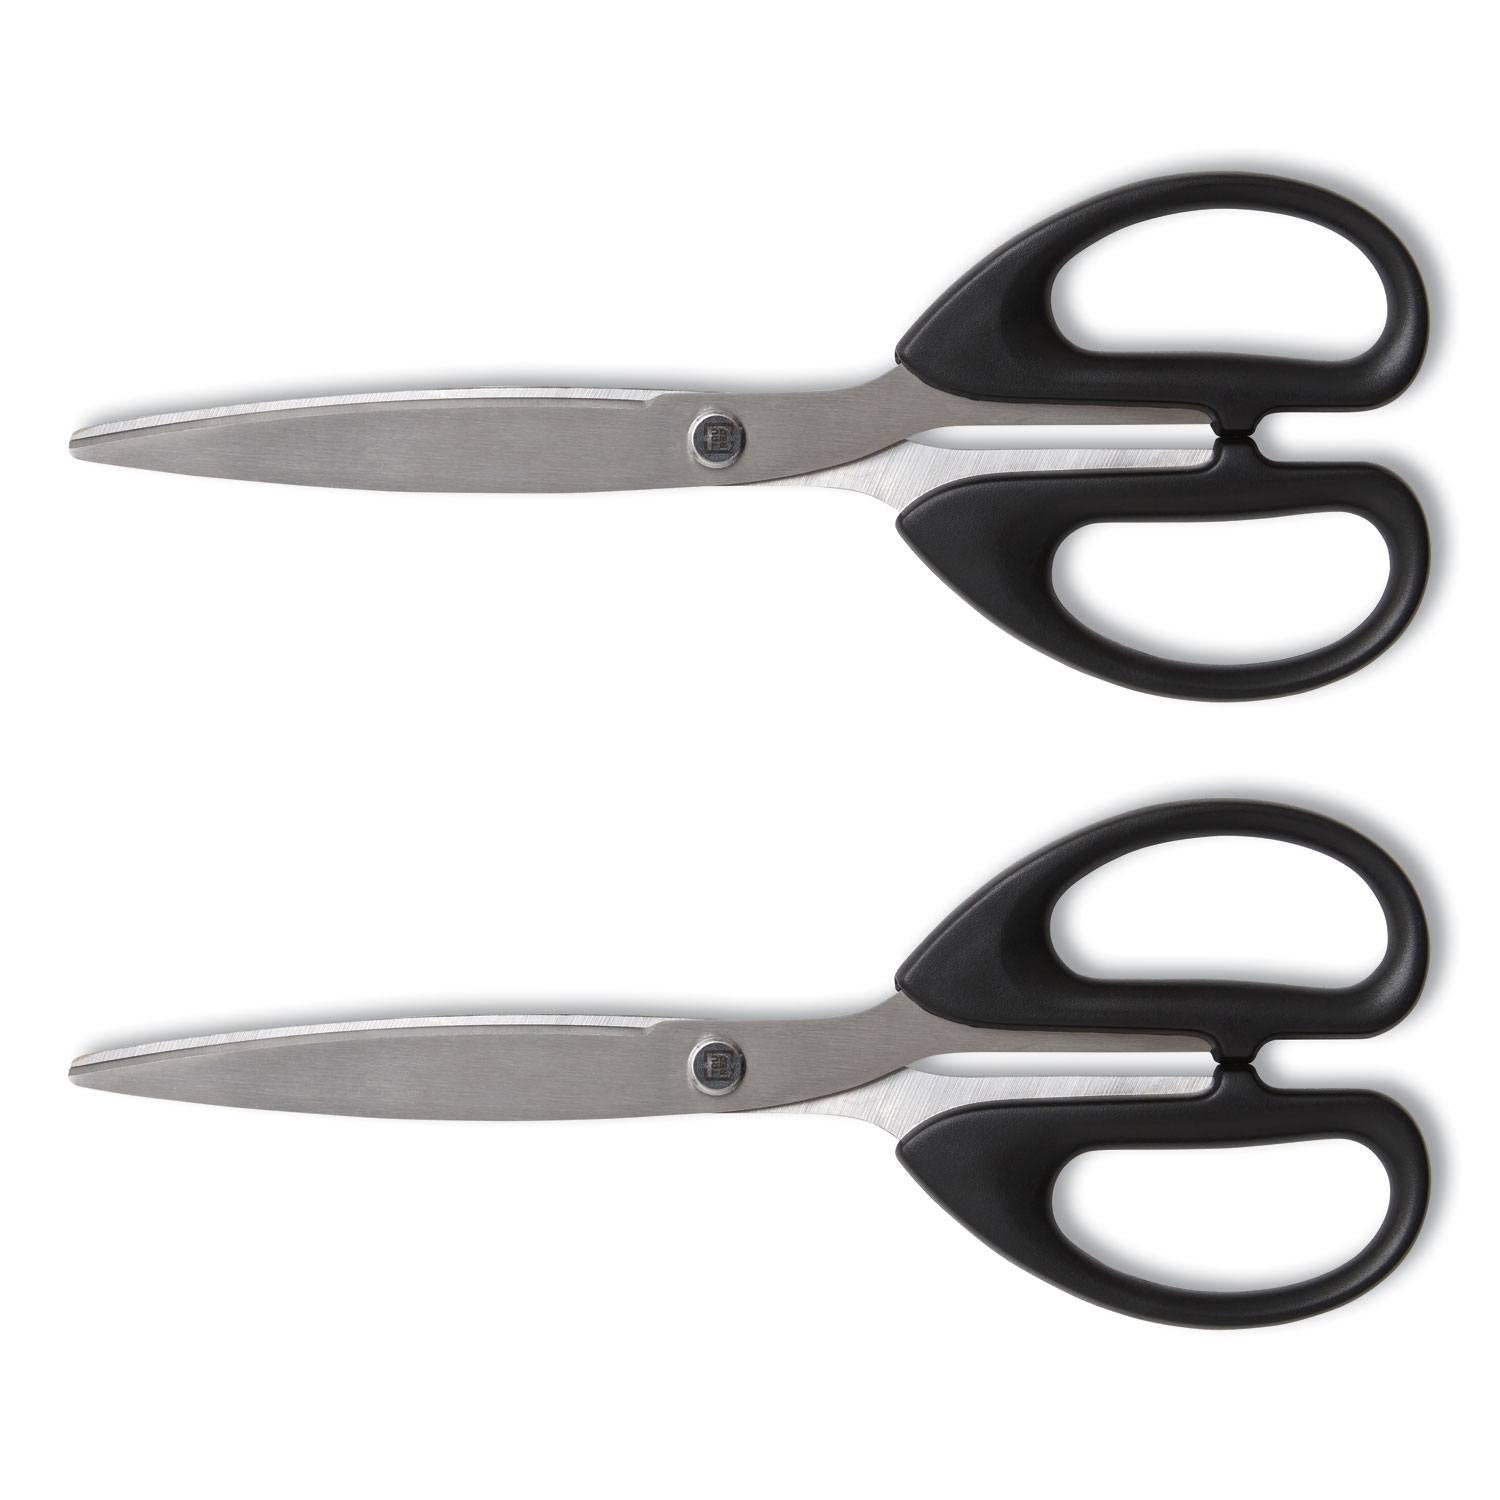 3M - Scissors & Shears; Blade Material: Stainless Steel; Handle Material:  Plastic; Length of Cut (Inch): 8; Handle Style: Comfort Grip; Handedness:  Ambidextrous - 10194116 - MSC Industrial Supply